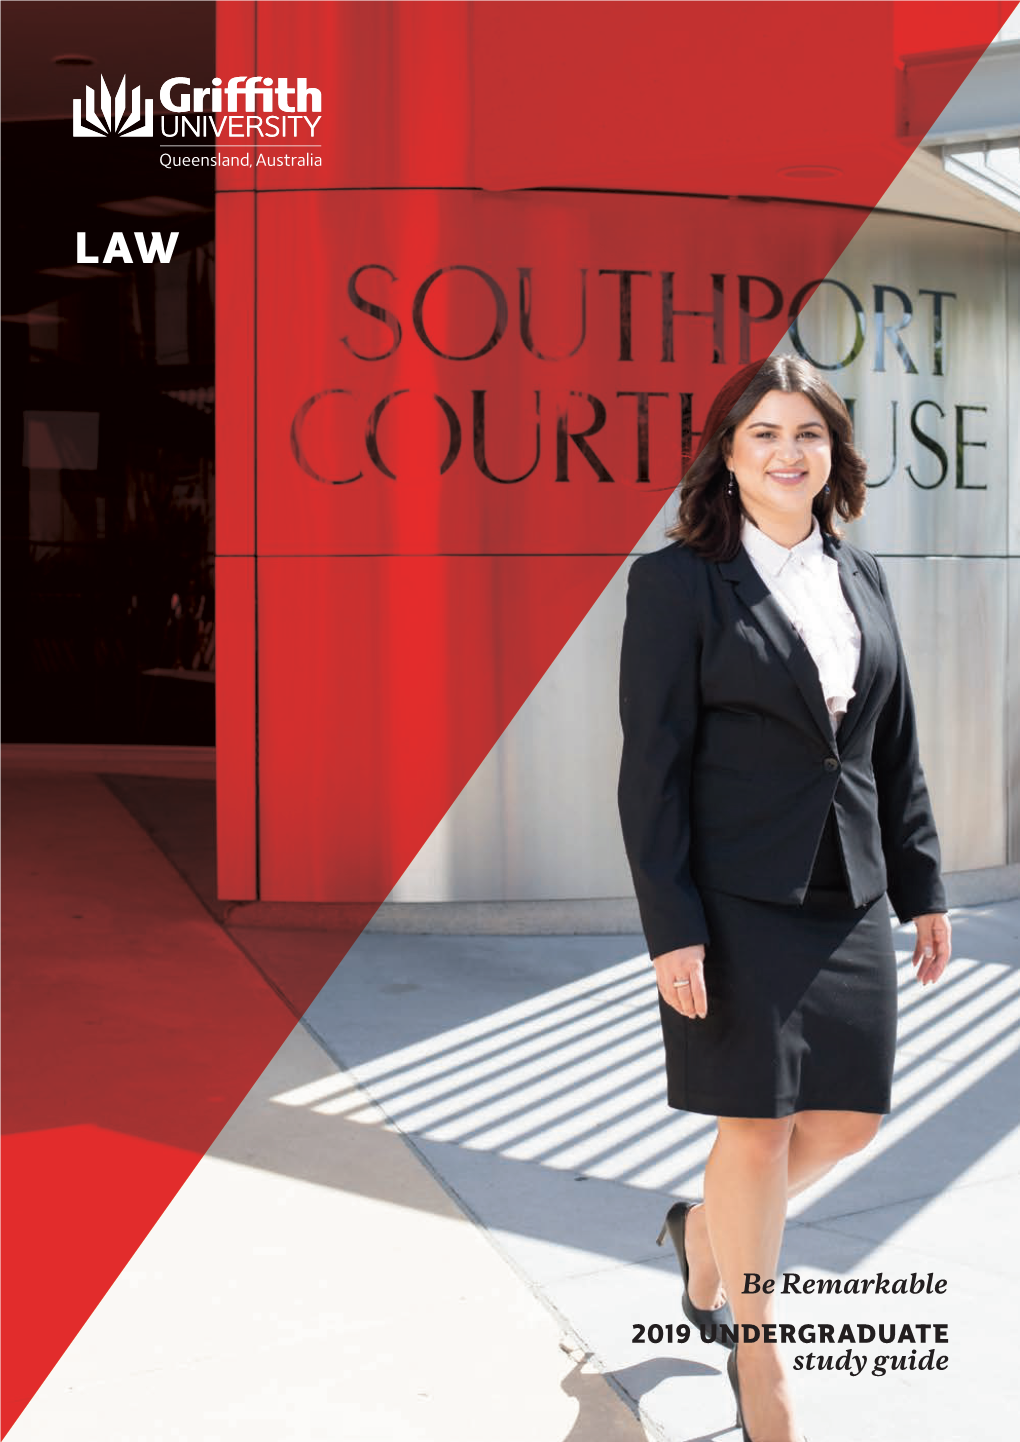 Law 2019 Undergraduate Study Guide Why Choose Griffith?